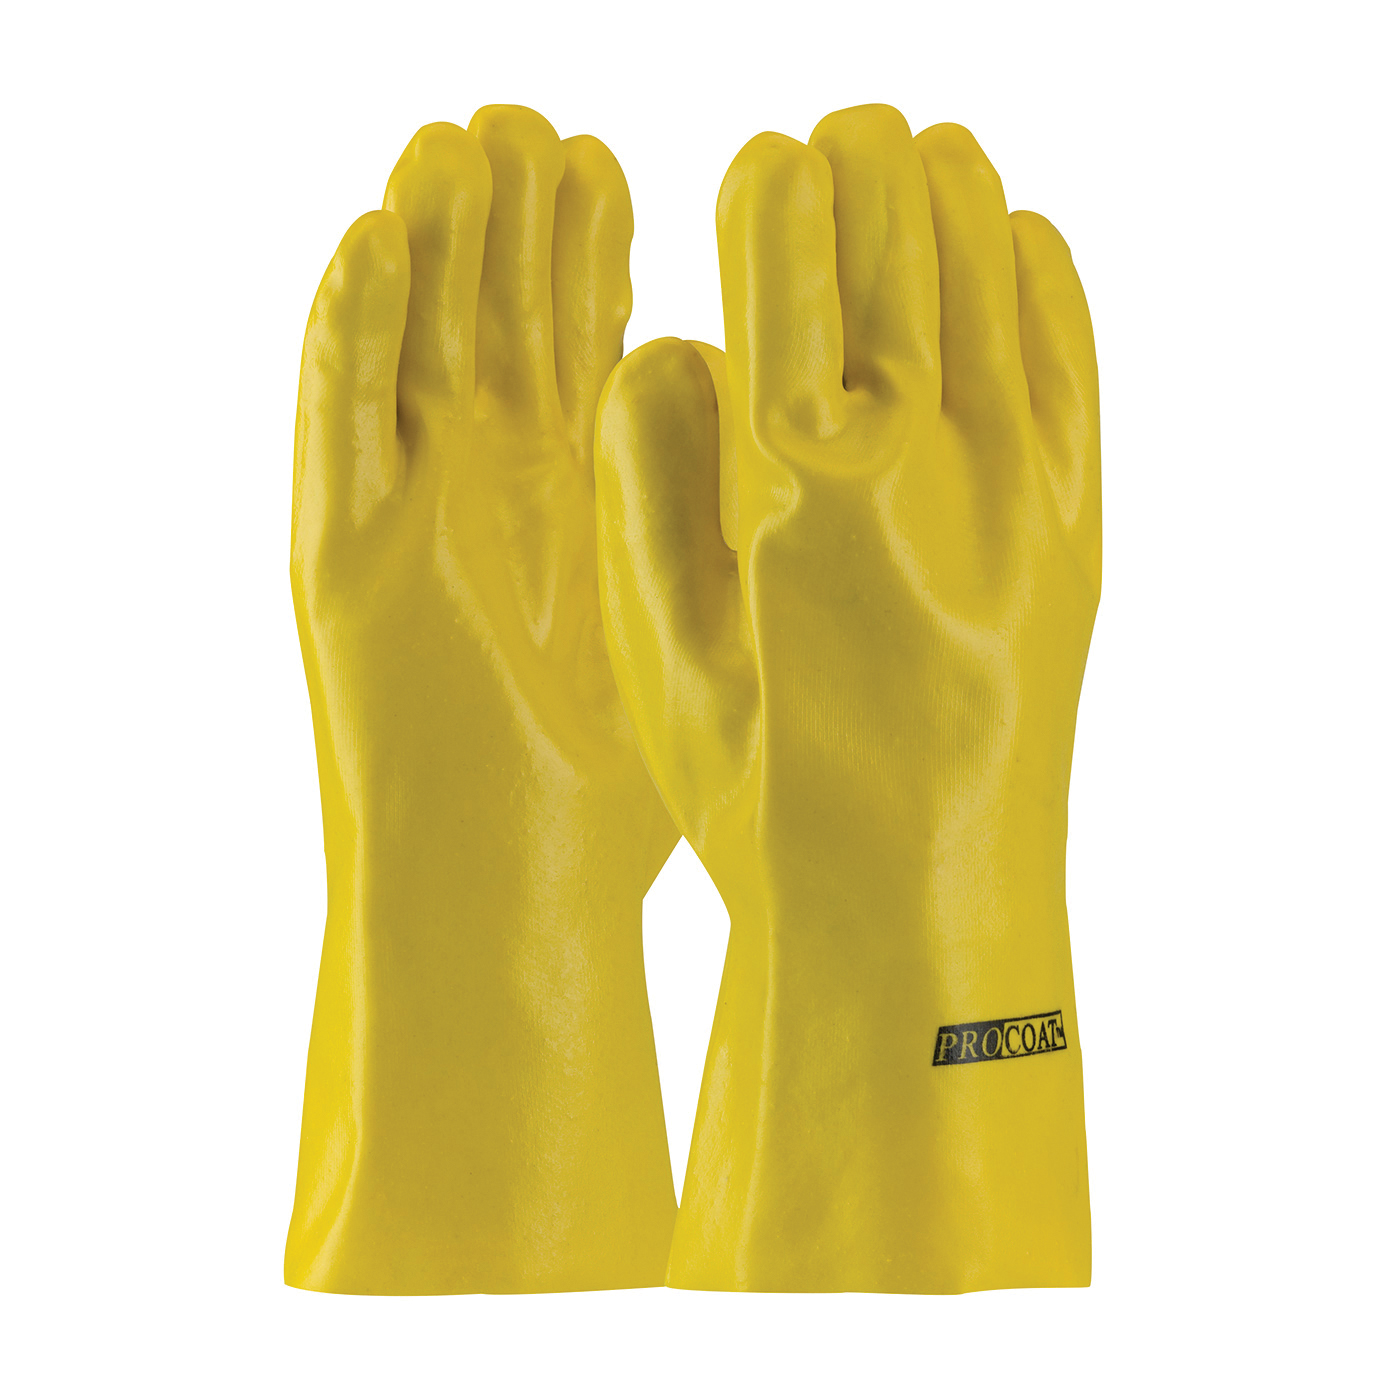 PIP® ProCoat® 58-8030Y Men's Single Dipped Chemical-Resistant Gloves, Universal, Cotton/PVC, Yellow, Jersey Lining, 12 in L, Resists: Abrasion, Cut, Puncture and Tear, Supported Support, Gauntlet Cuff